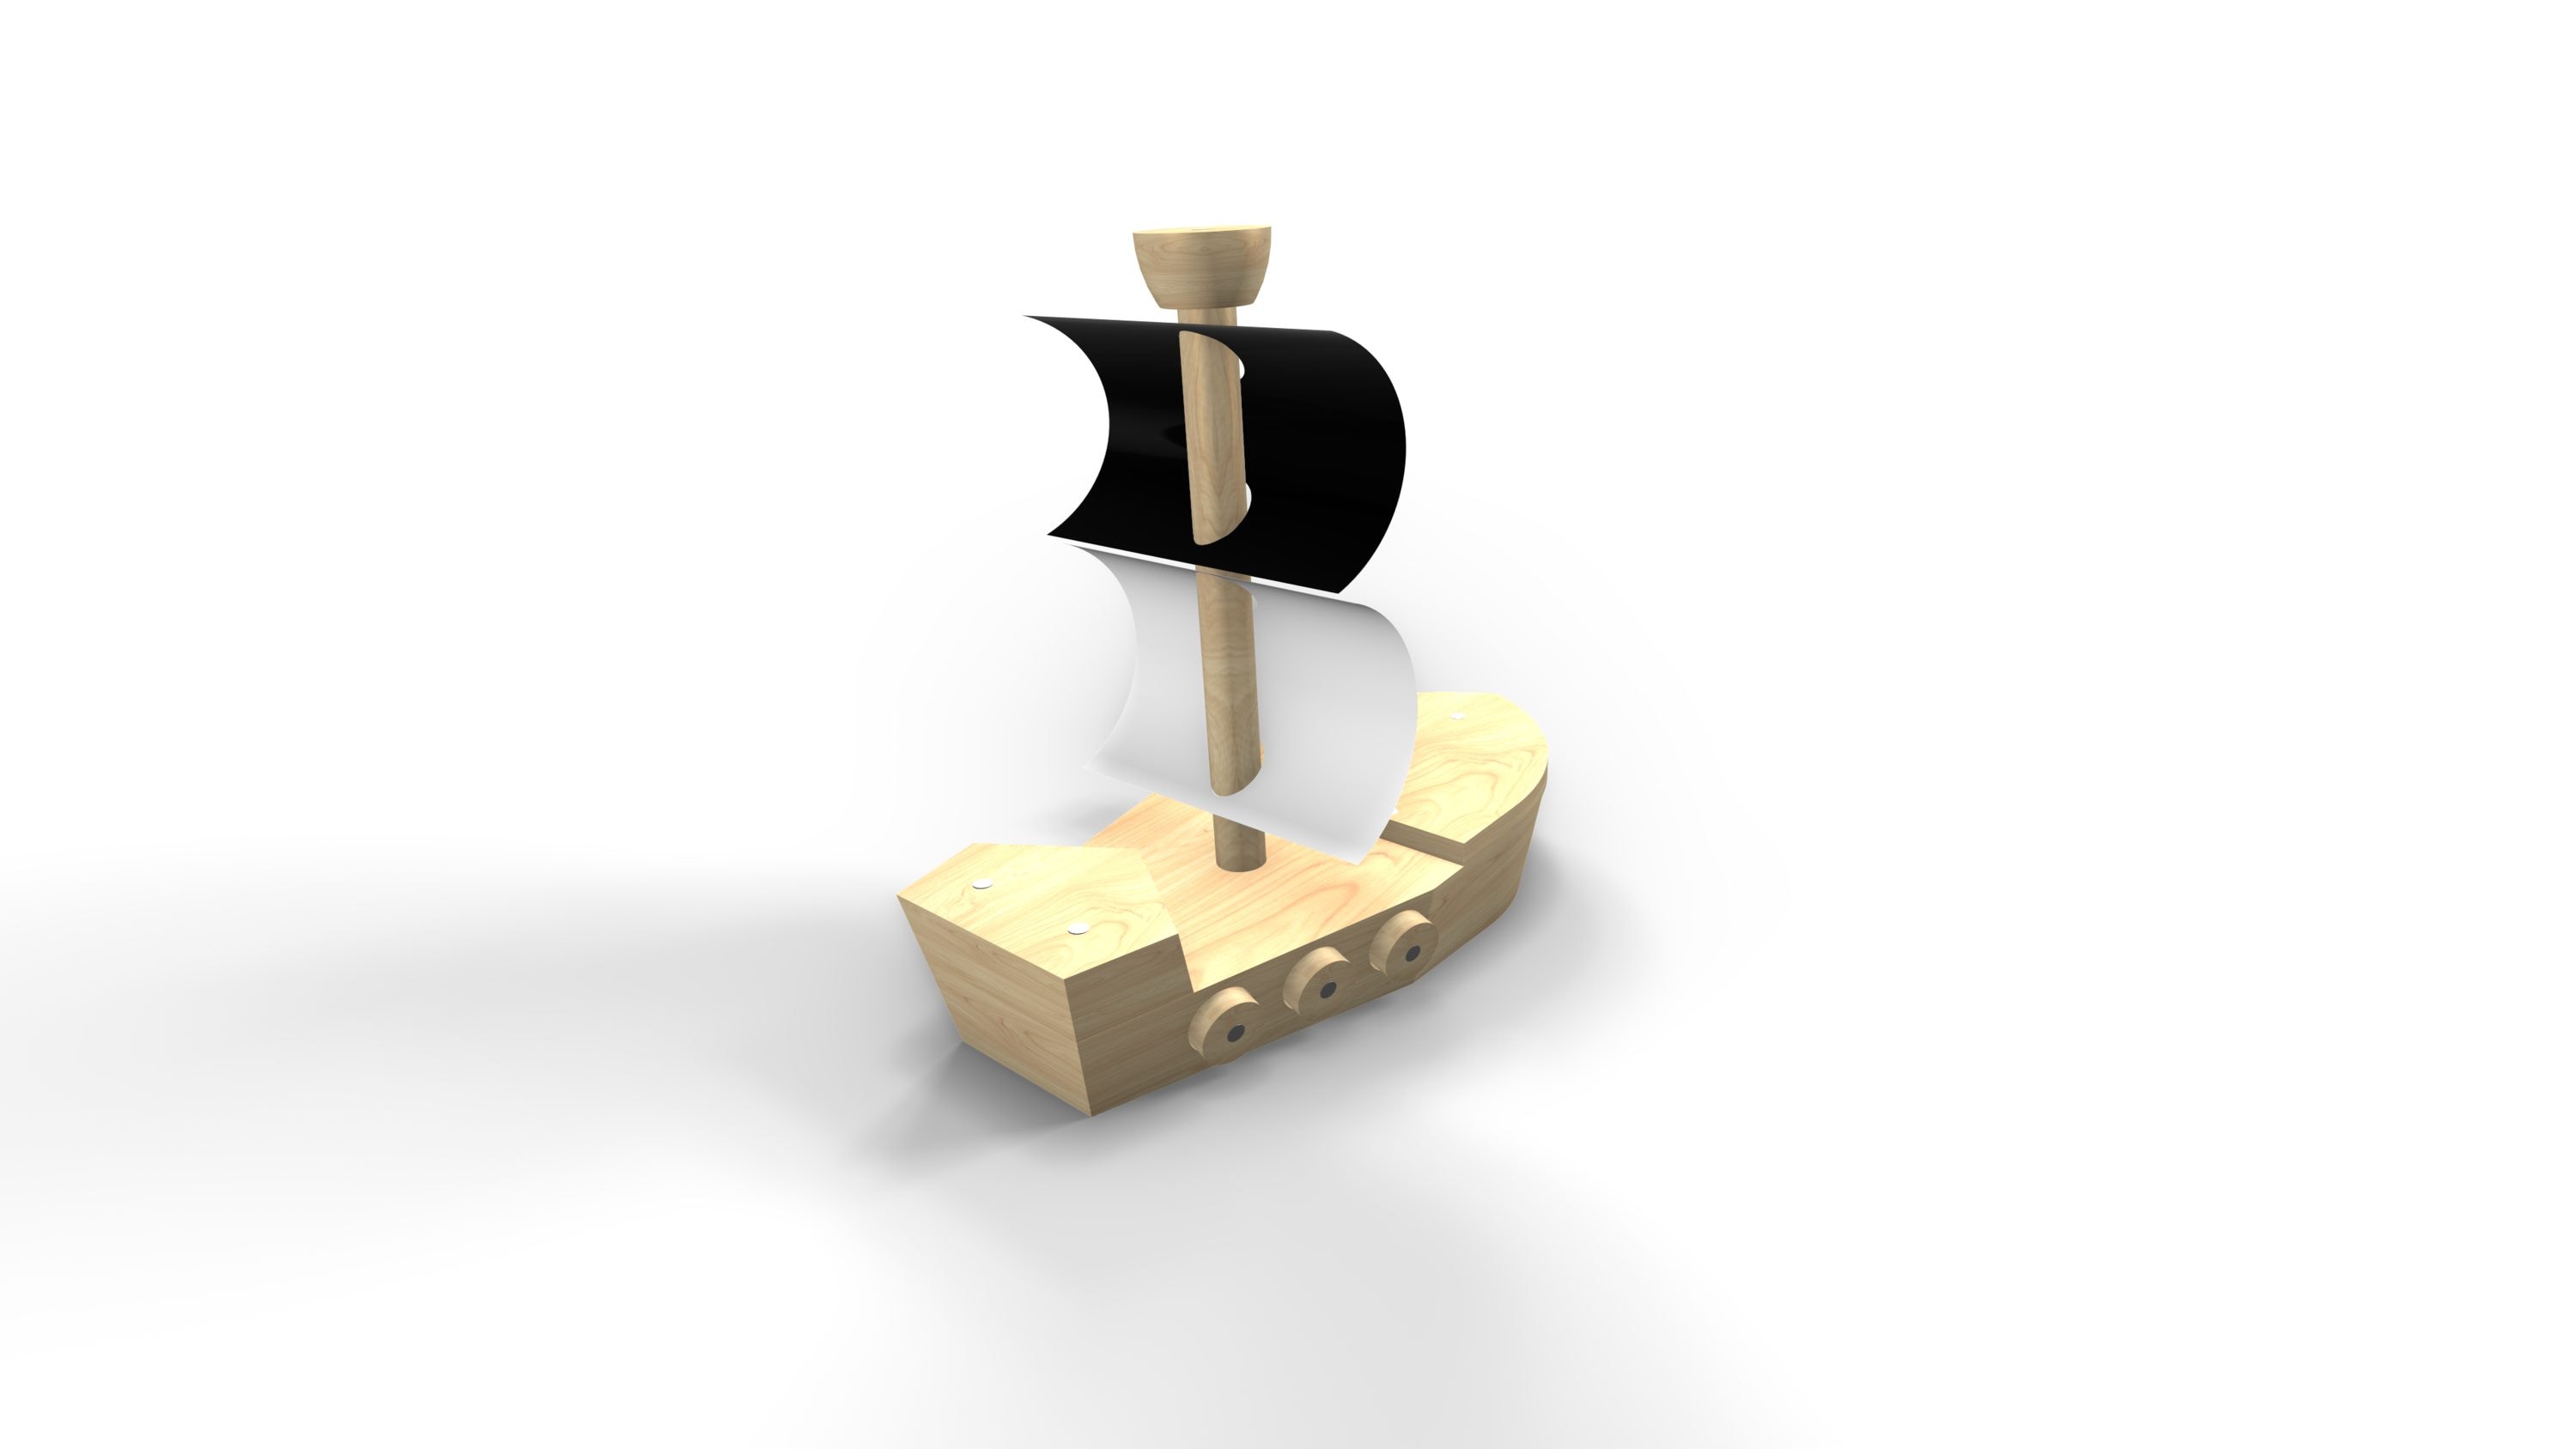 Build and Grow Kid's Beginner Pirate Ship Project Kit in the Kids Project  Kits department at